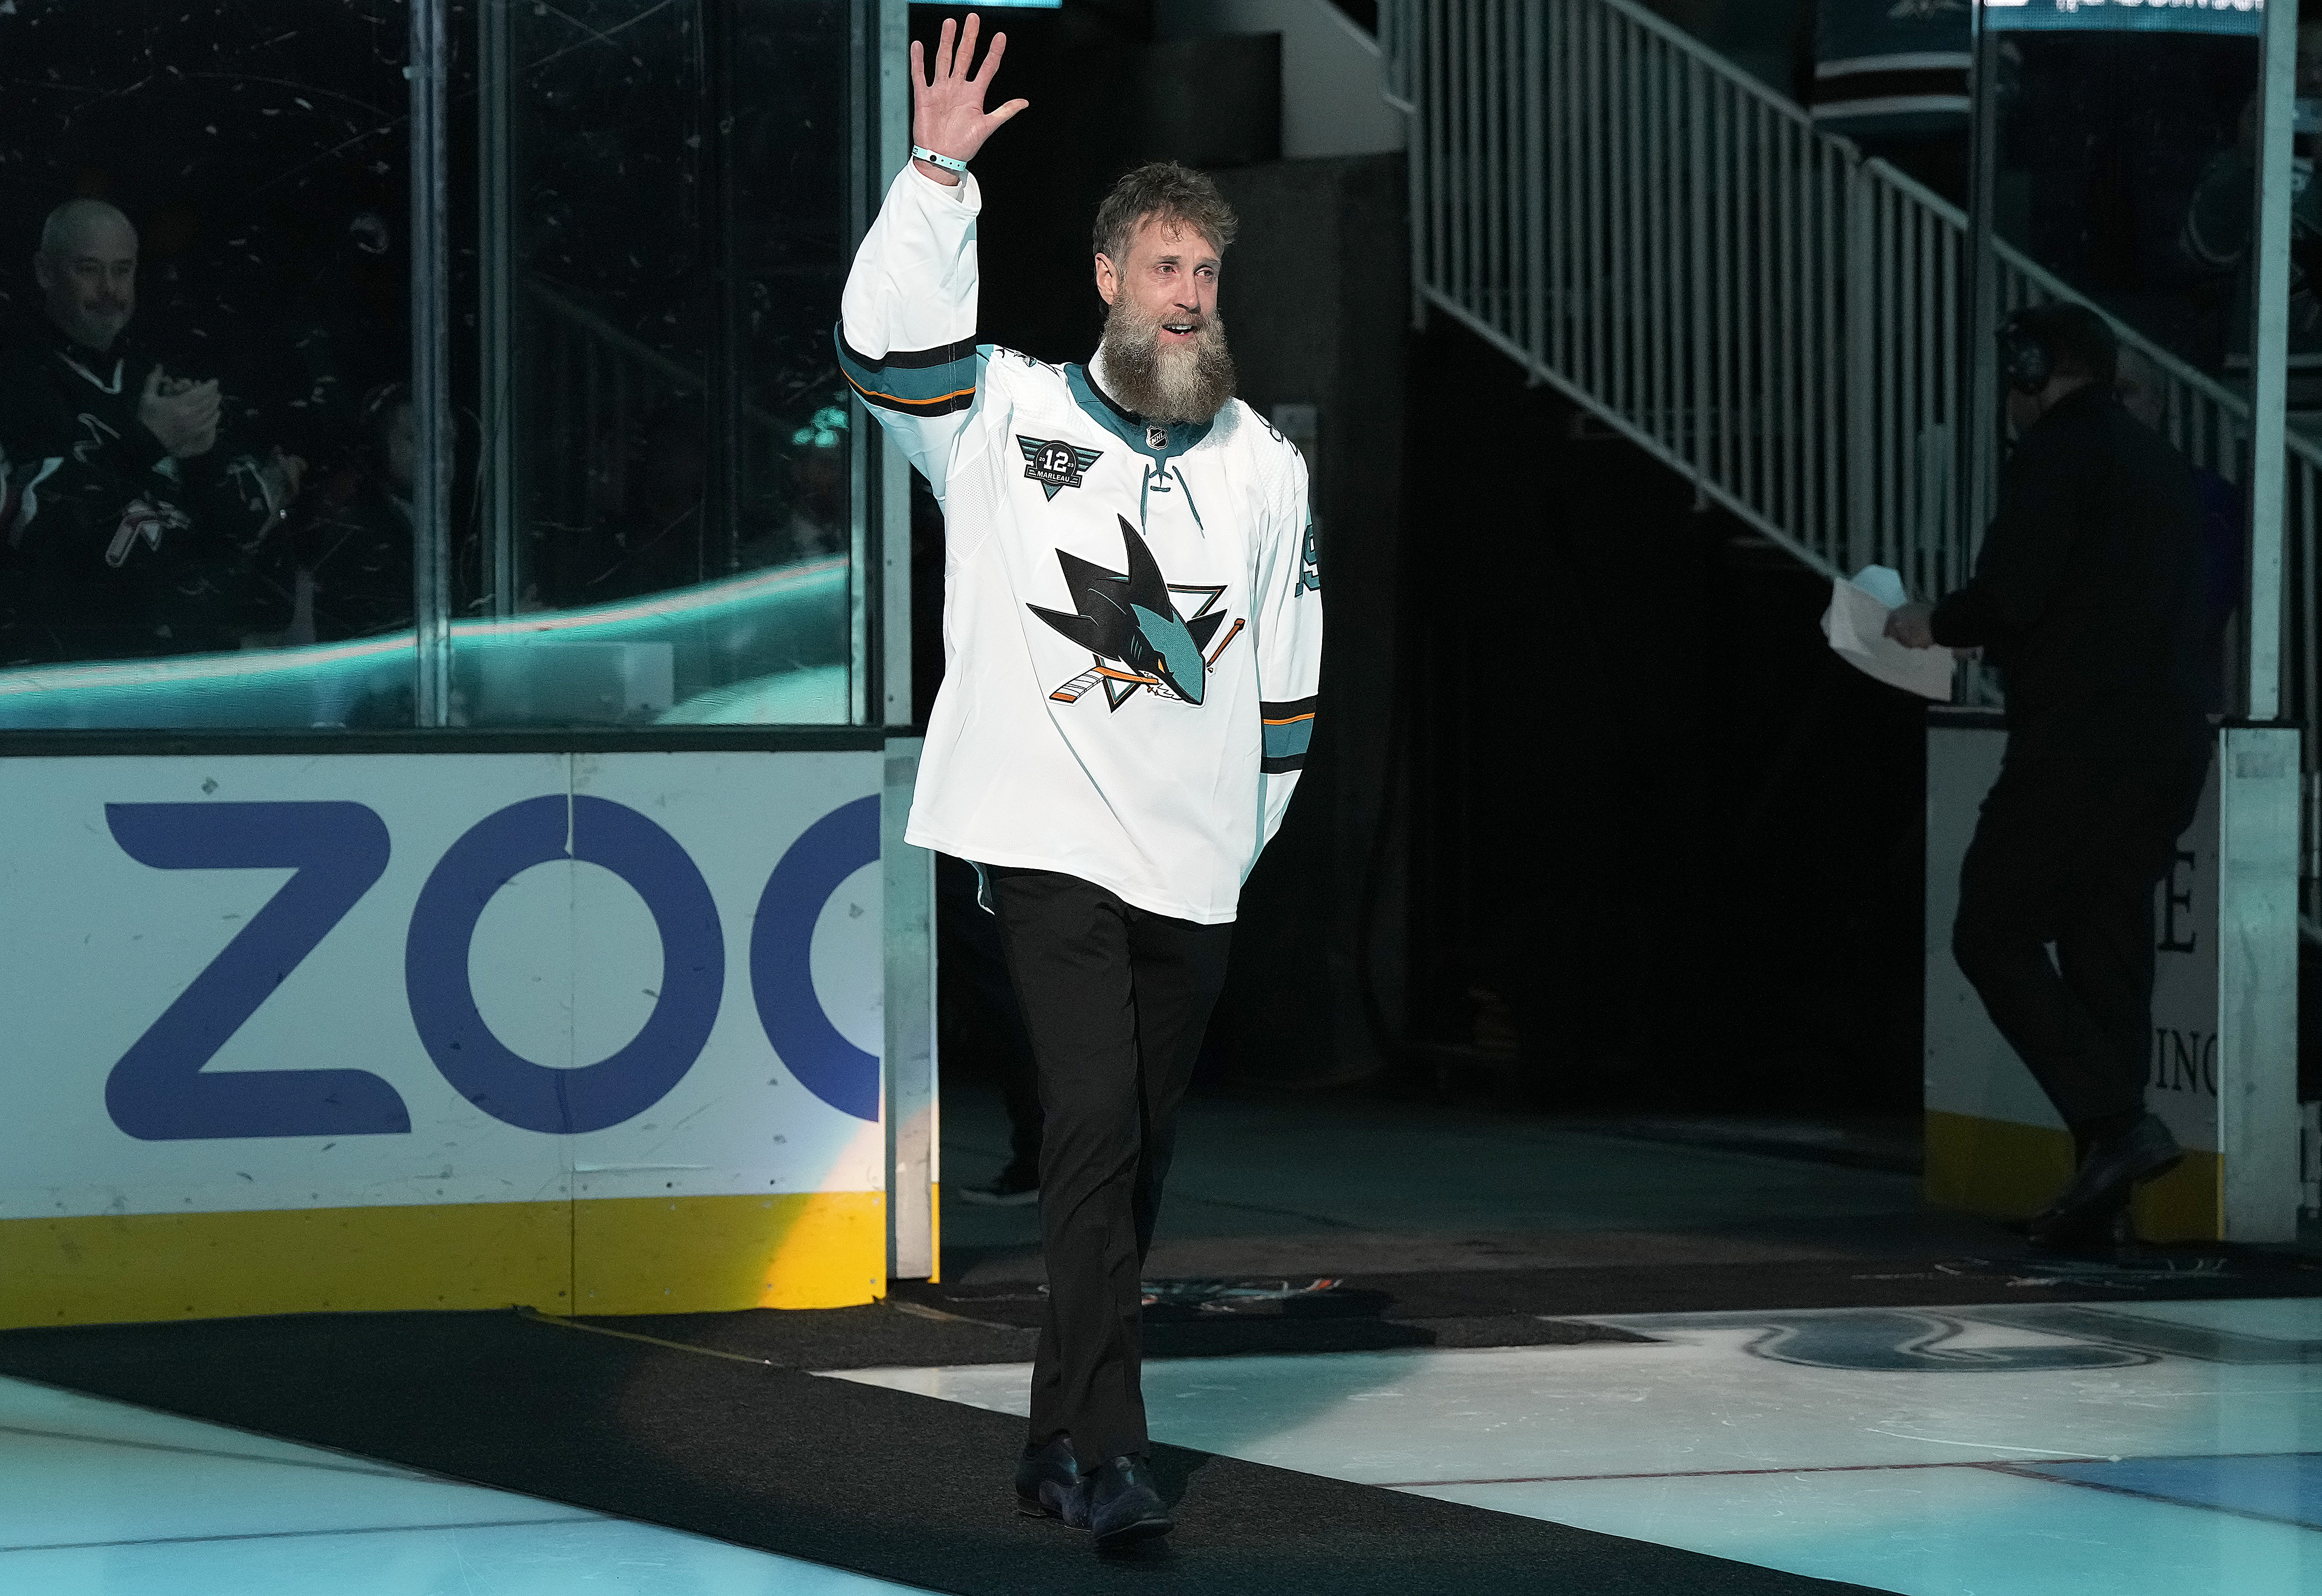 Joe Thornton, former player of the San Jose Sharks, attends the jersey-retiring ceremony of Patrick Marleauat at SAP Center in San Jose, California, February 25, 2023 . /CFP